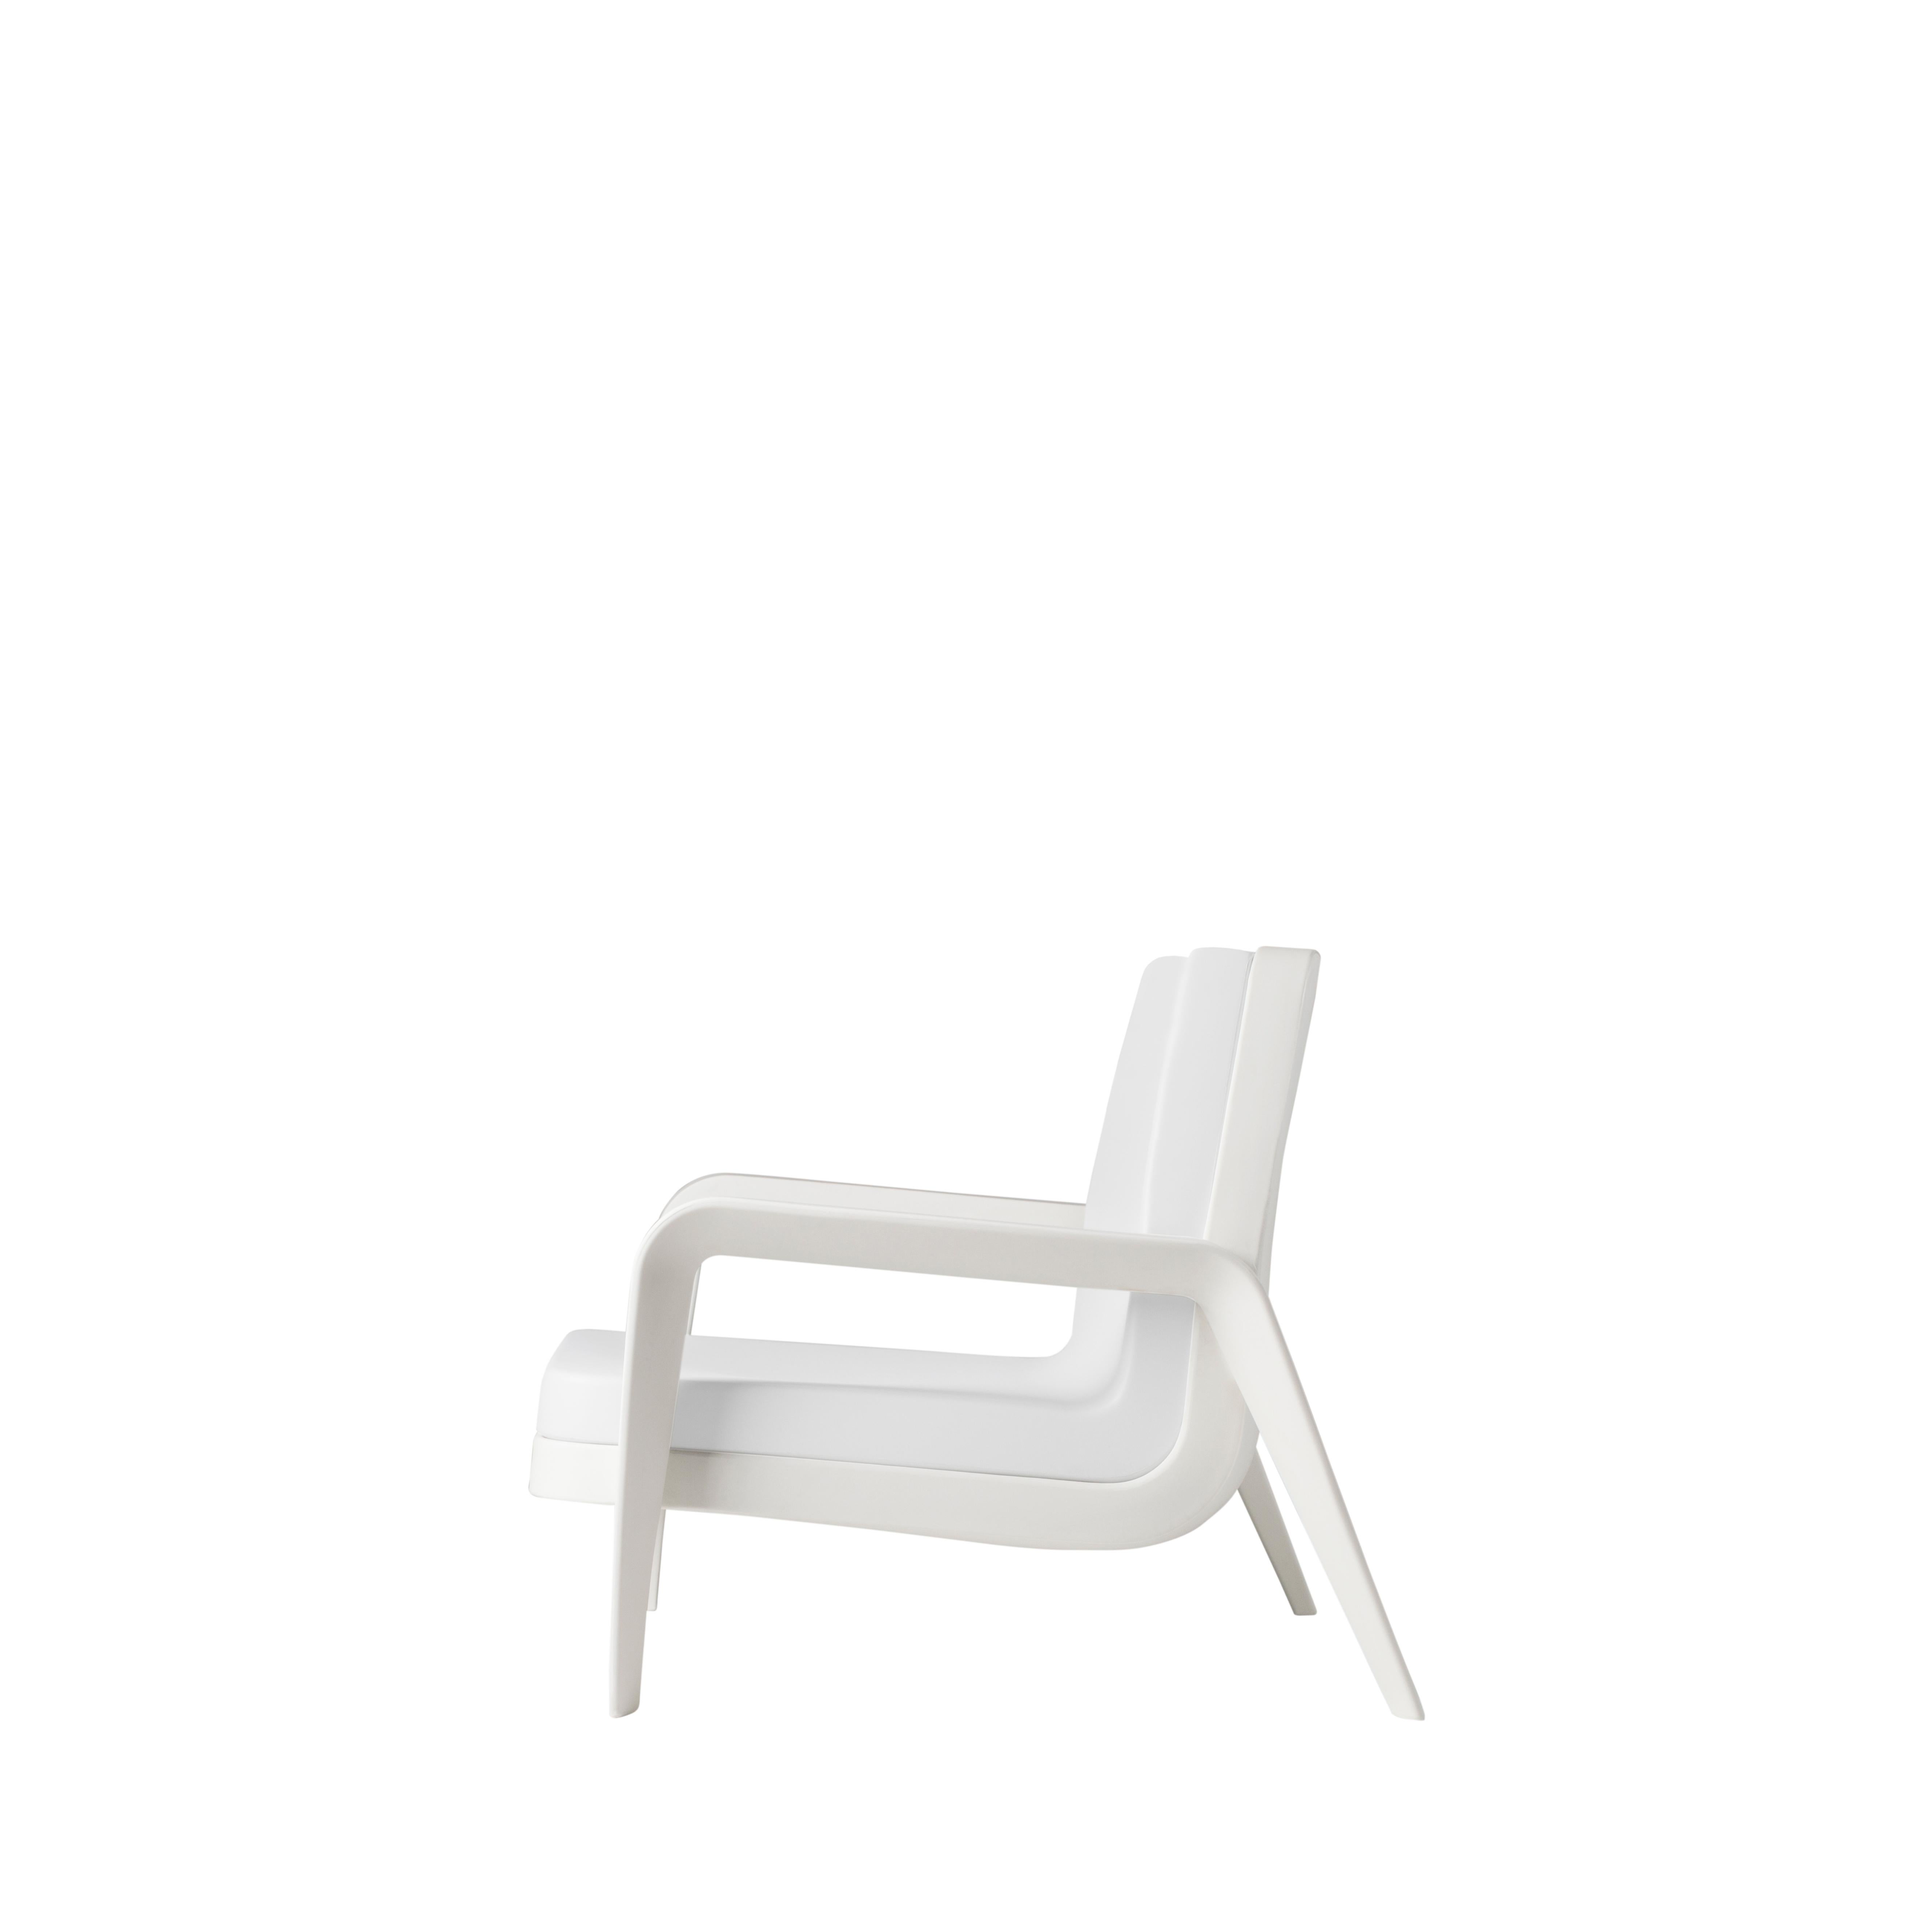 Italian Slide Design America Armchair in Soft White Fabric with Milky White Frame For Sale